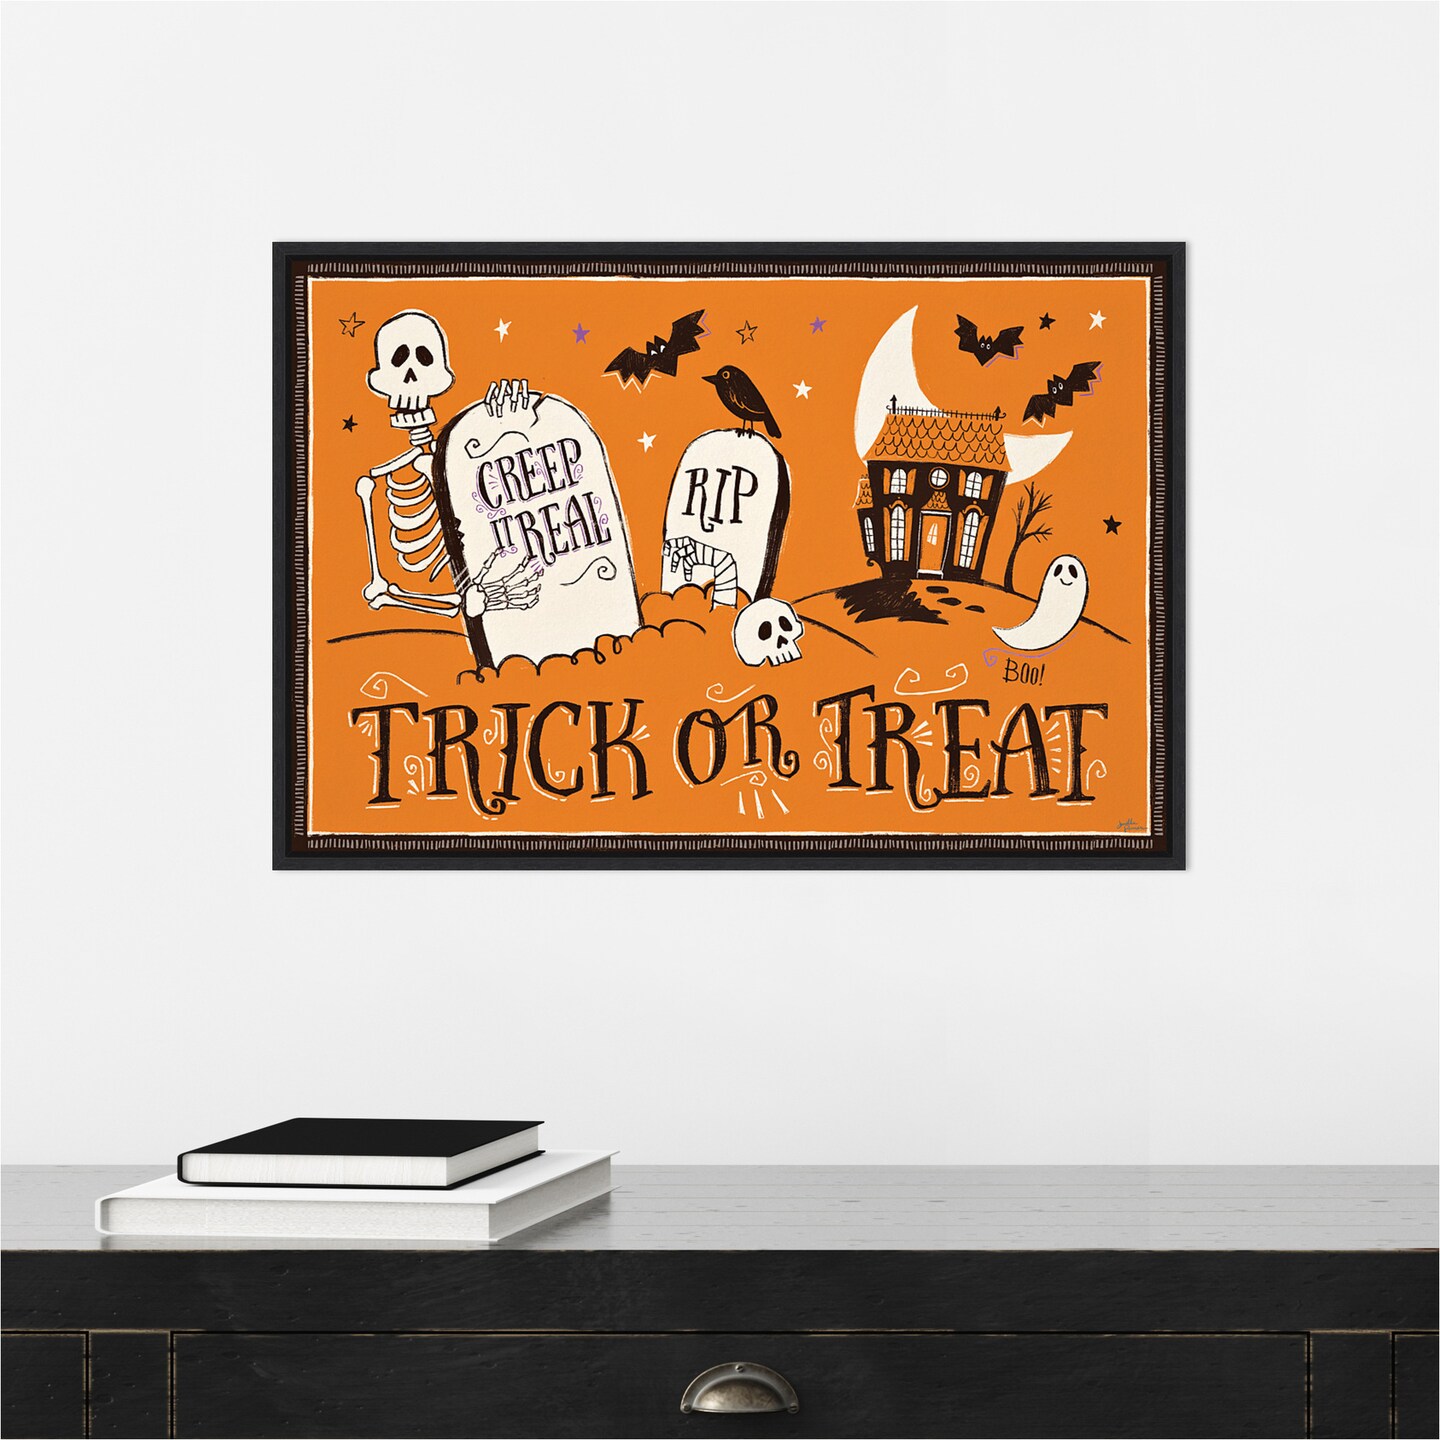 Spooktacular XI by Janelle Penner 23-in. W x 16-in. H. Canvas Wall Art Print Framed in Black